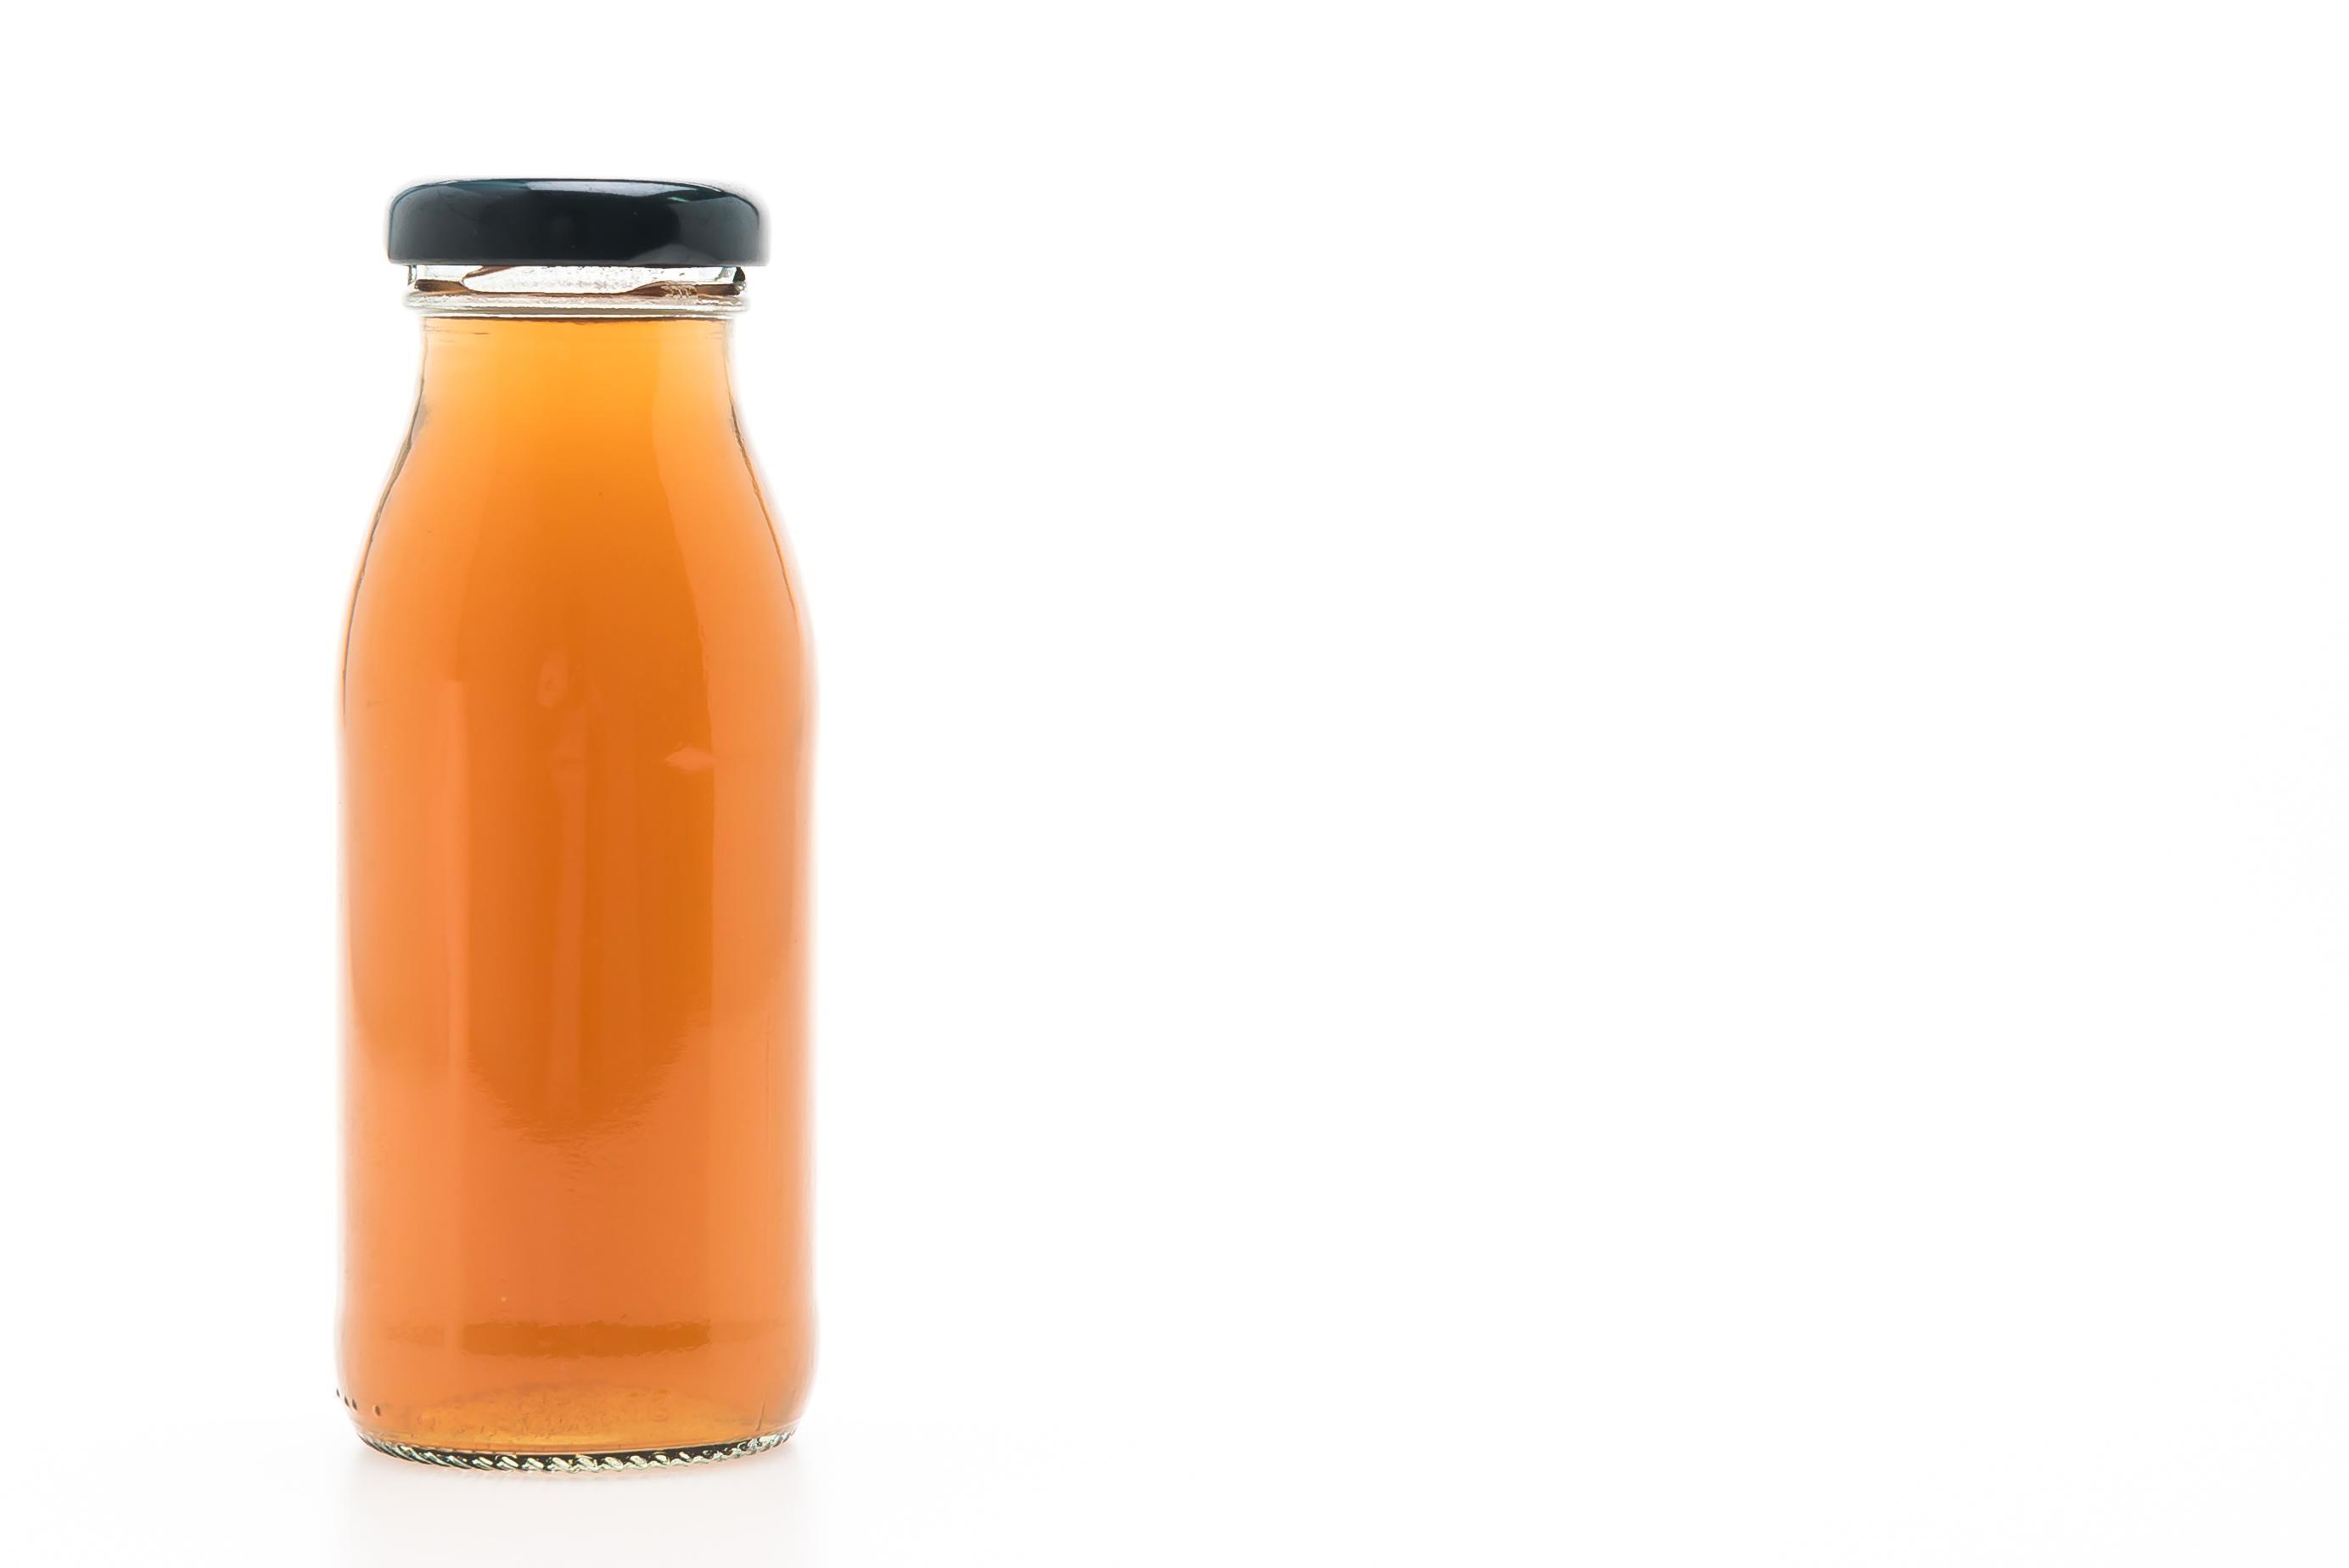 https://static.vecteezy.com/system/resources/previews/002/200/716/large_2x/fruit-and-vegetable-juice-bottle-isolated-on-white-background-free-photo.jpg